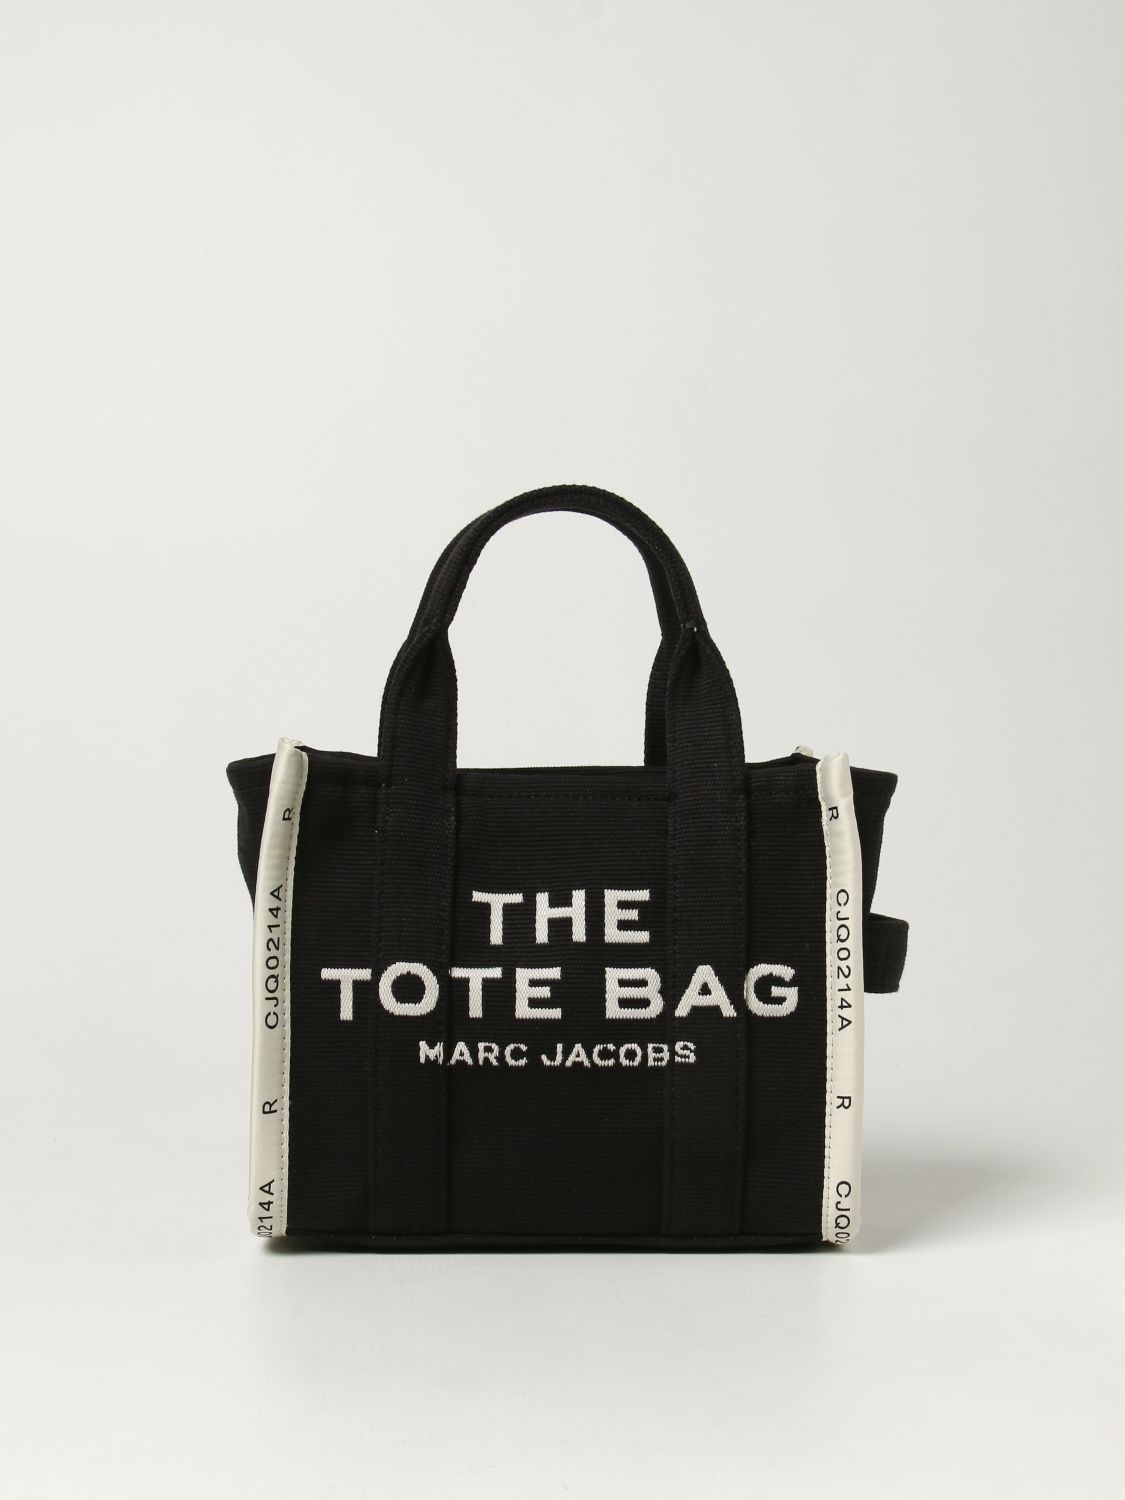 MARC JACOBS: The Tote Bag canvas bag - Black | Marc Jacobs tote bags ...